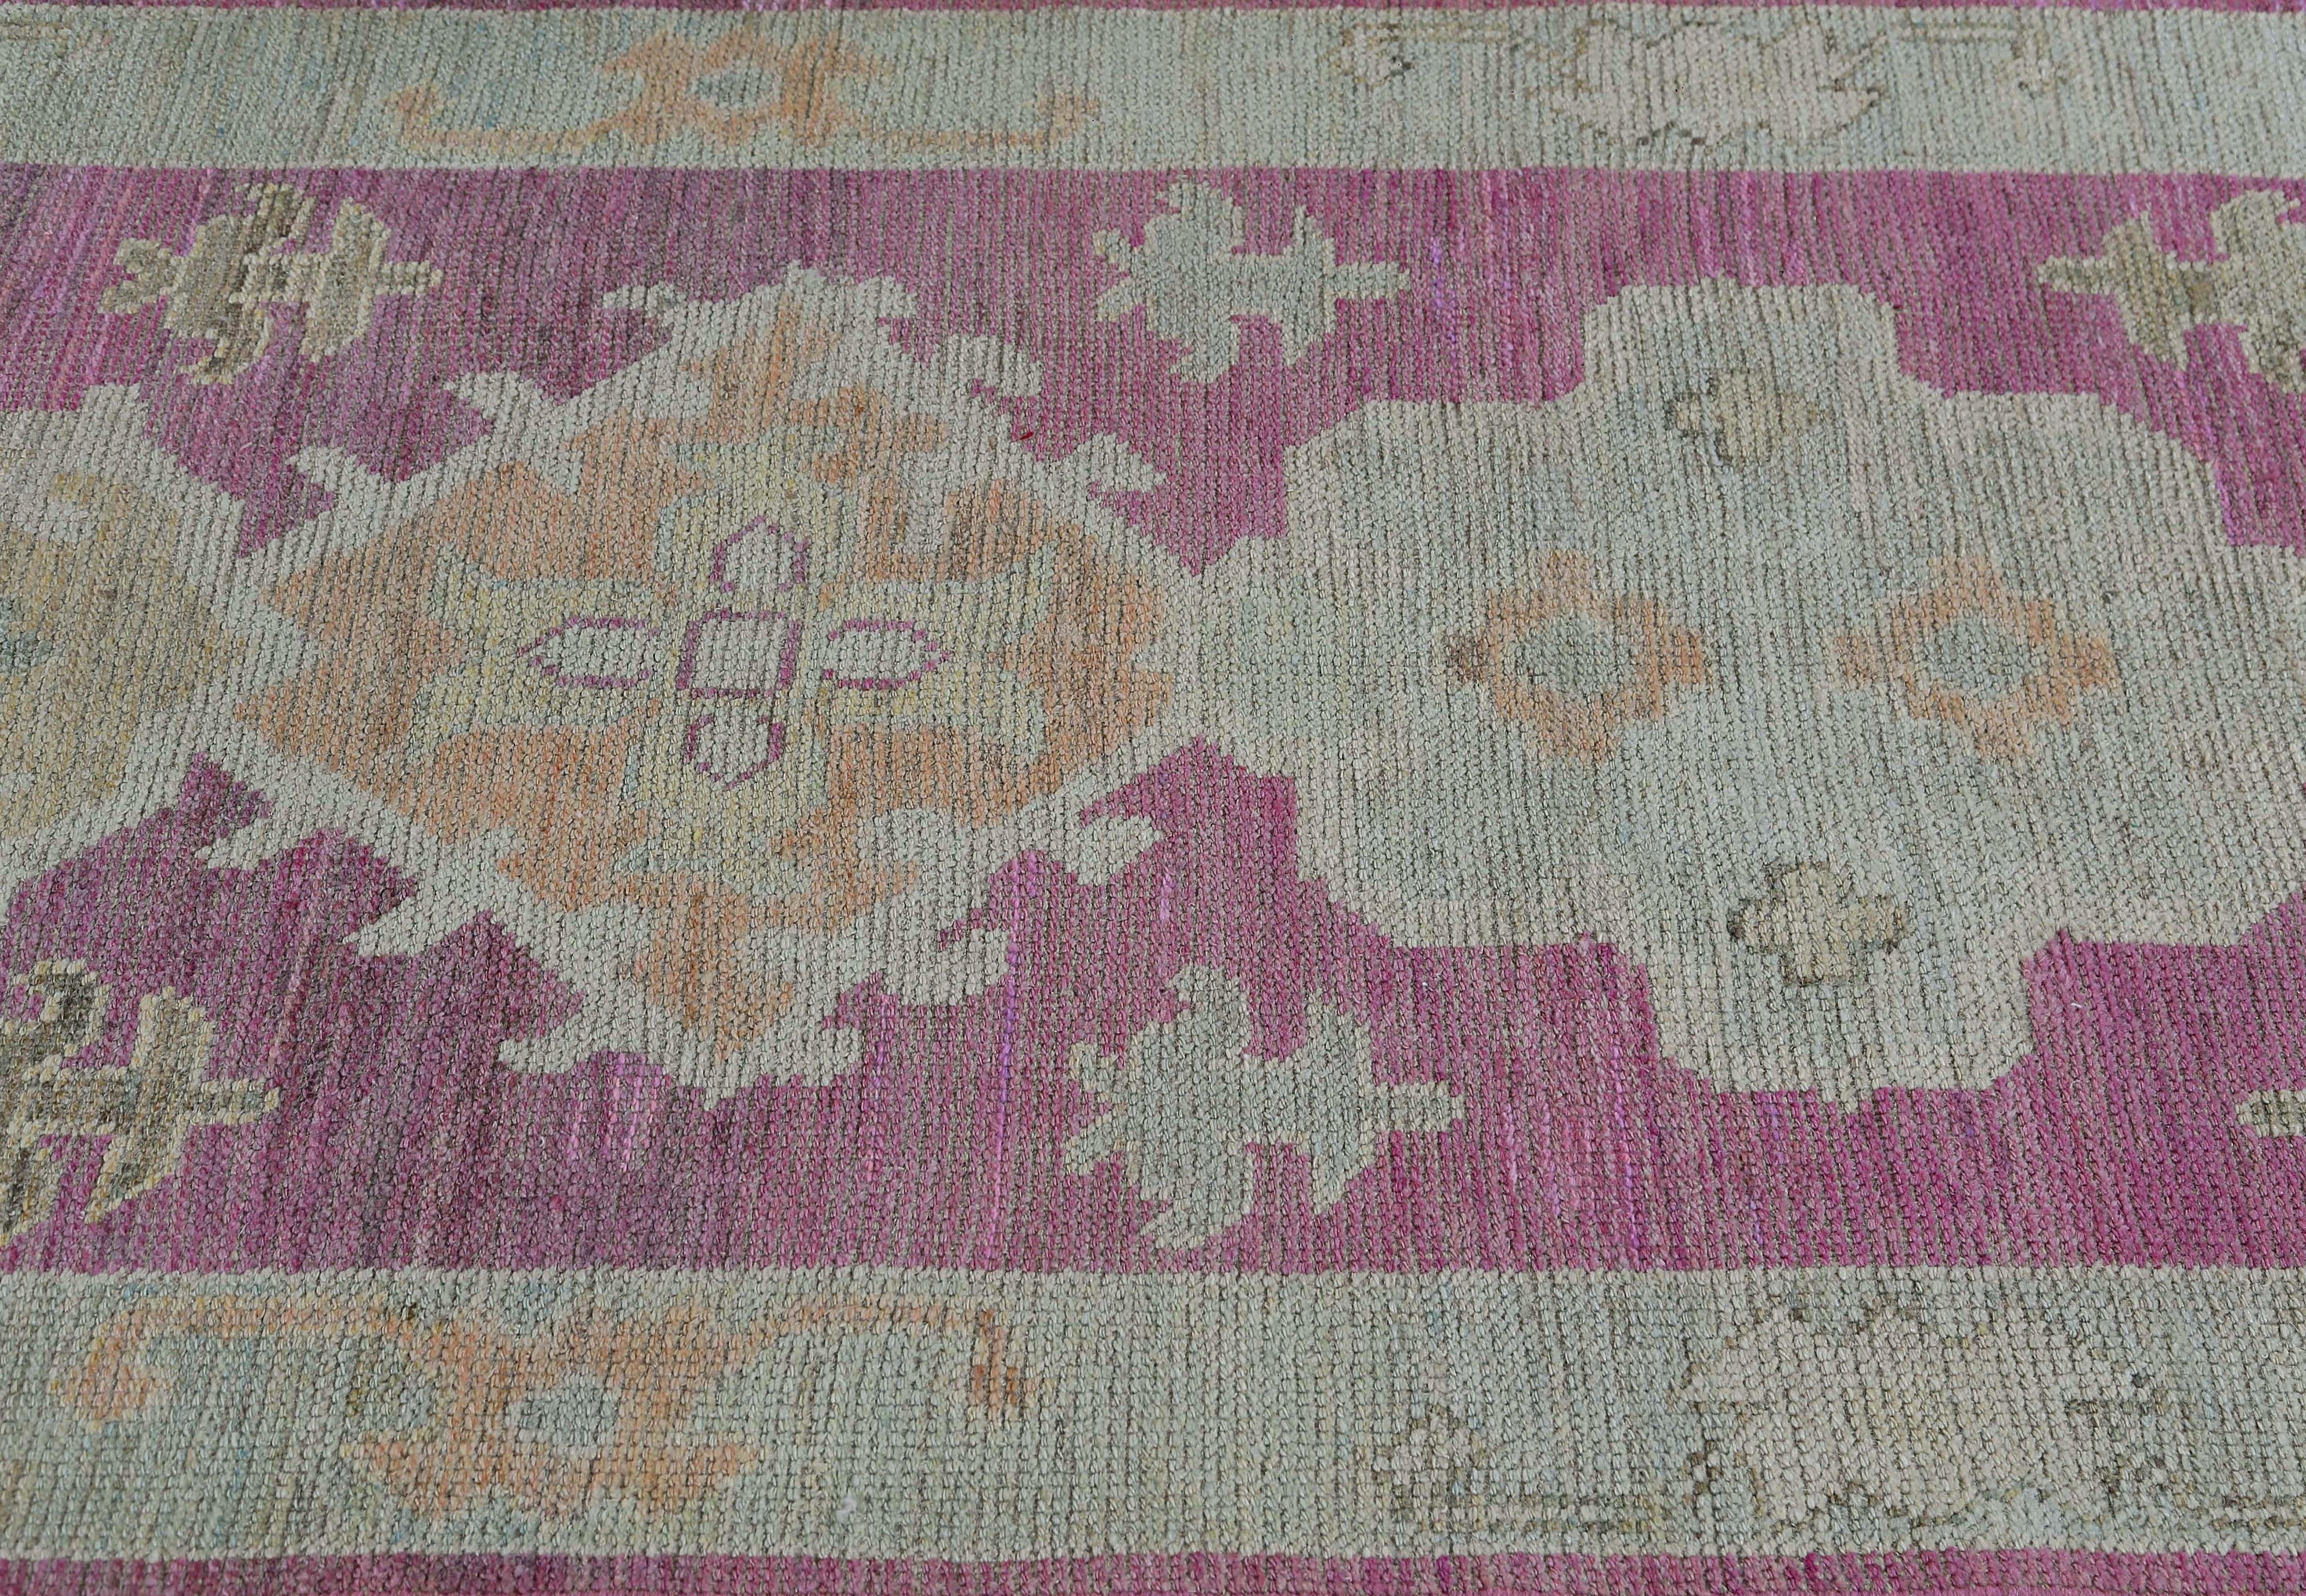 Introducing the exquisite Turkish oushak runner, a stunning piece of art that will add a pop of color and elegance to any hallway or entryway in your home. Measuring at 3'3'' x 9'9'', this runner's elongated shape and pink/purple foundation make it